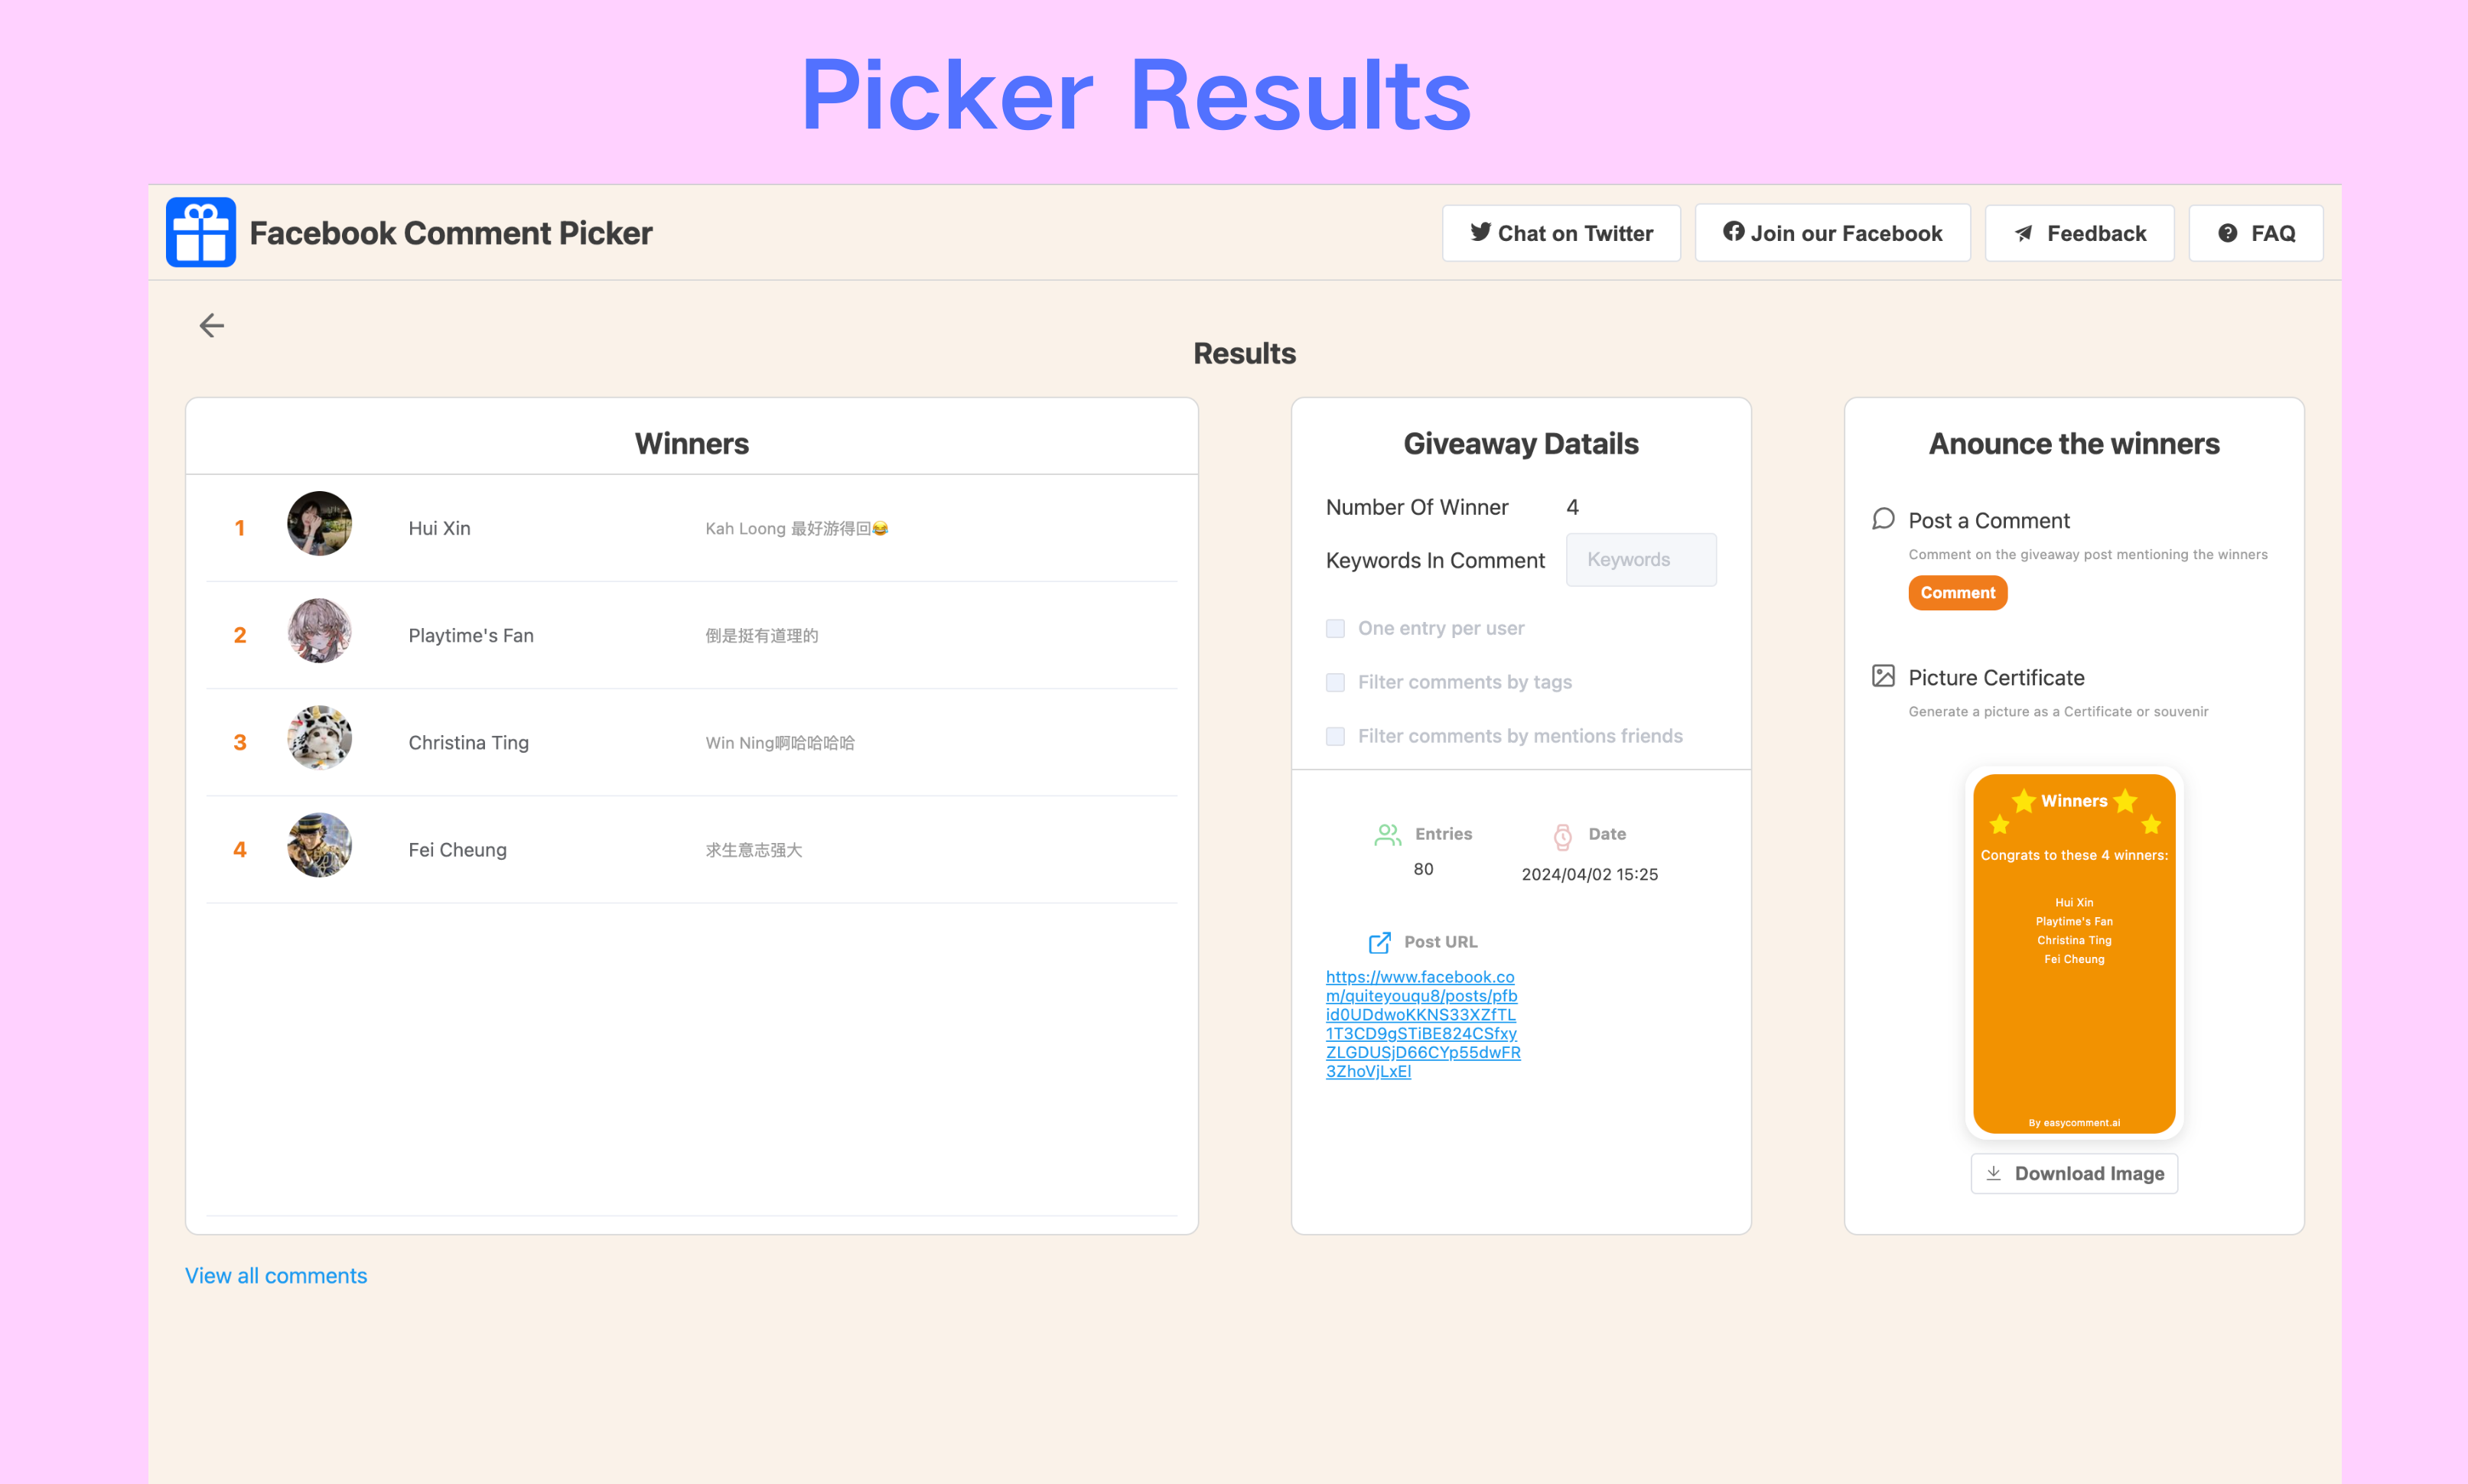 Step 4: Set up your draw configuration And Click "Picker Winner"  button to start the draw